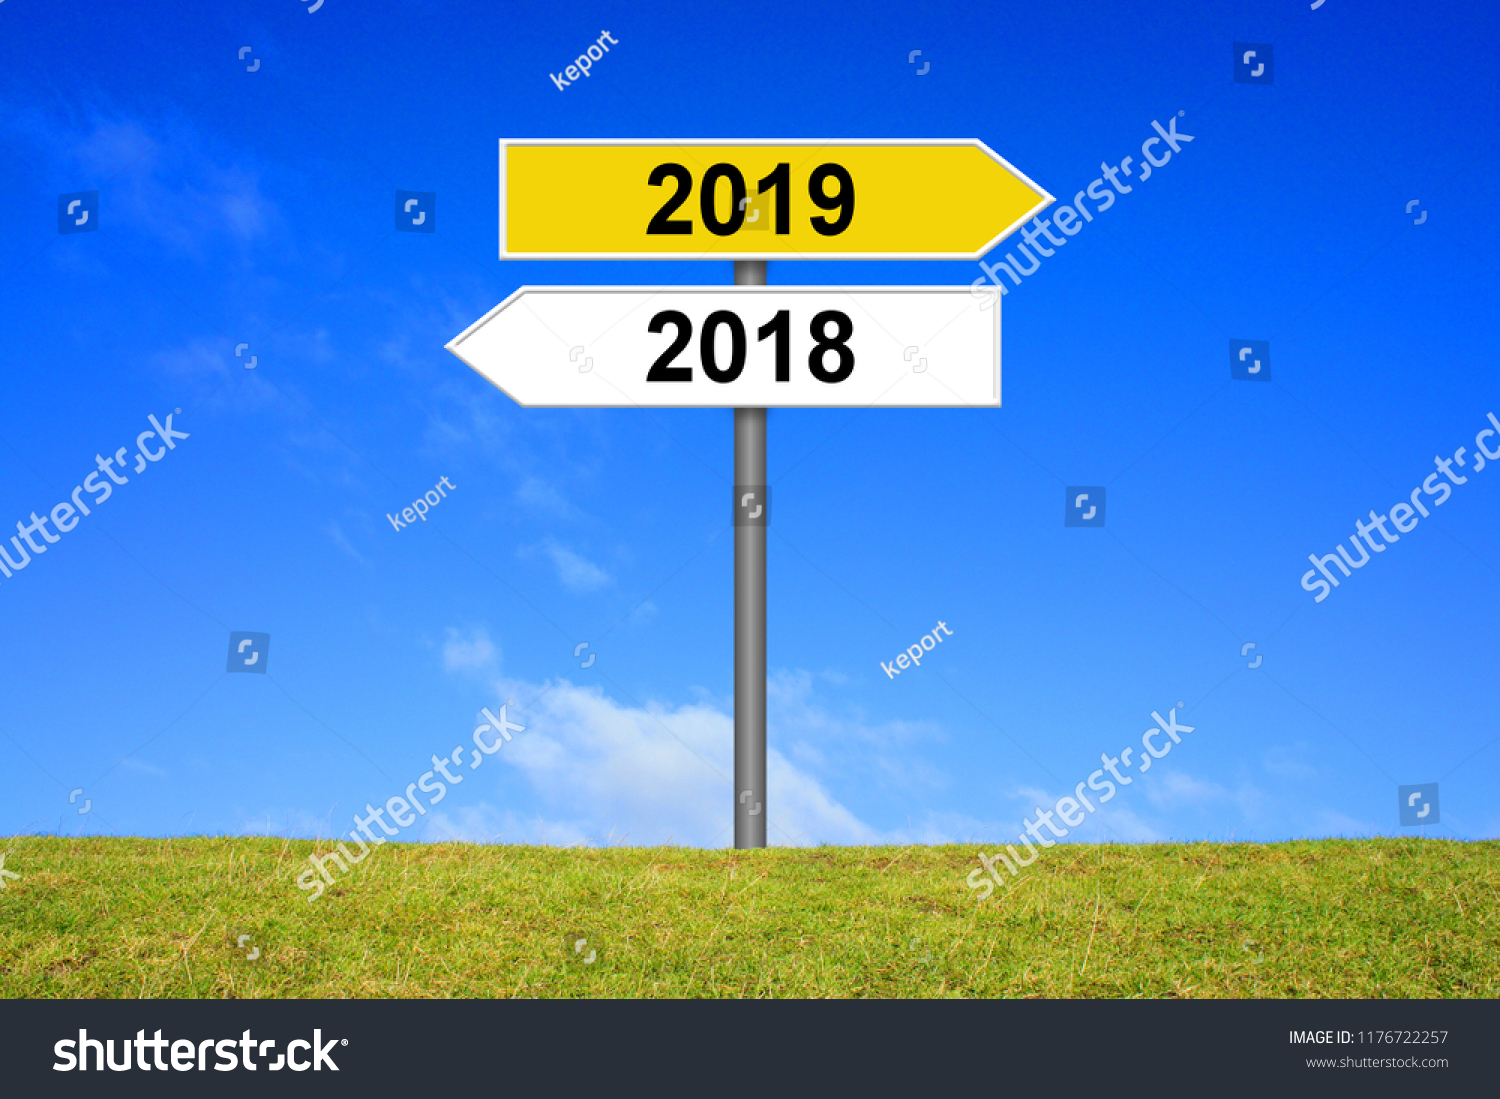 Signpost yellow and white showing old year 2018 and new year 2019 #1176722257